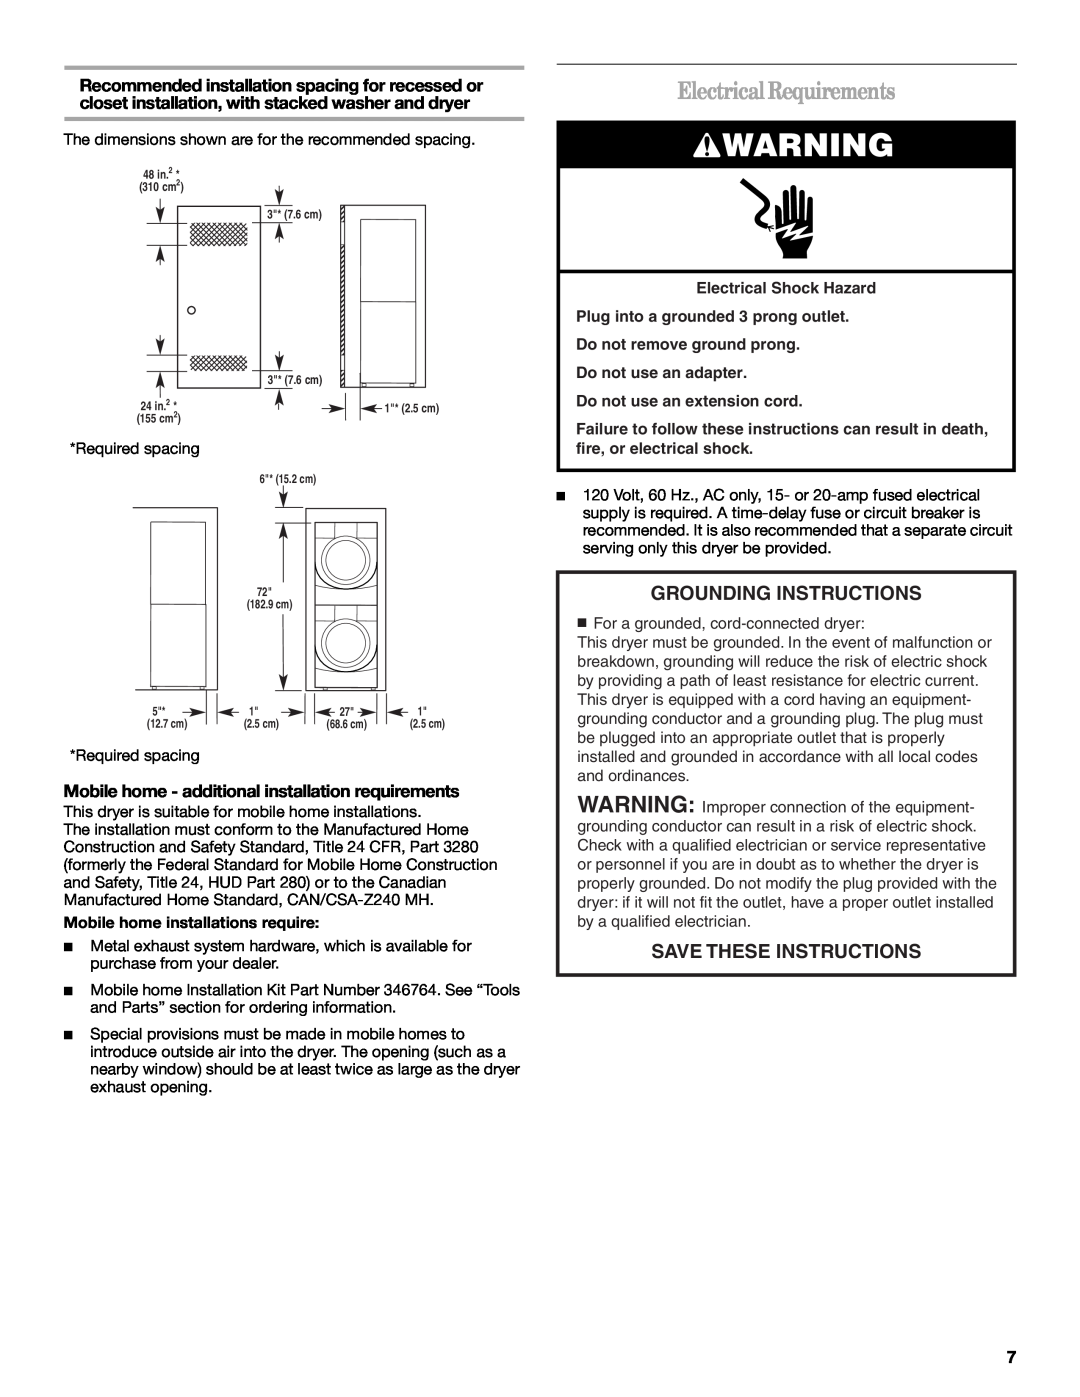 Whirlpool DUET SPORT, W10057260 manual Electrical Requirements, Grounding Instructions, Save These Instructions 